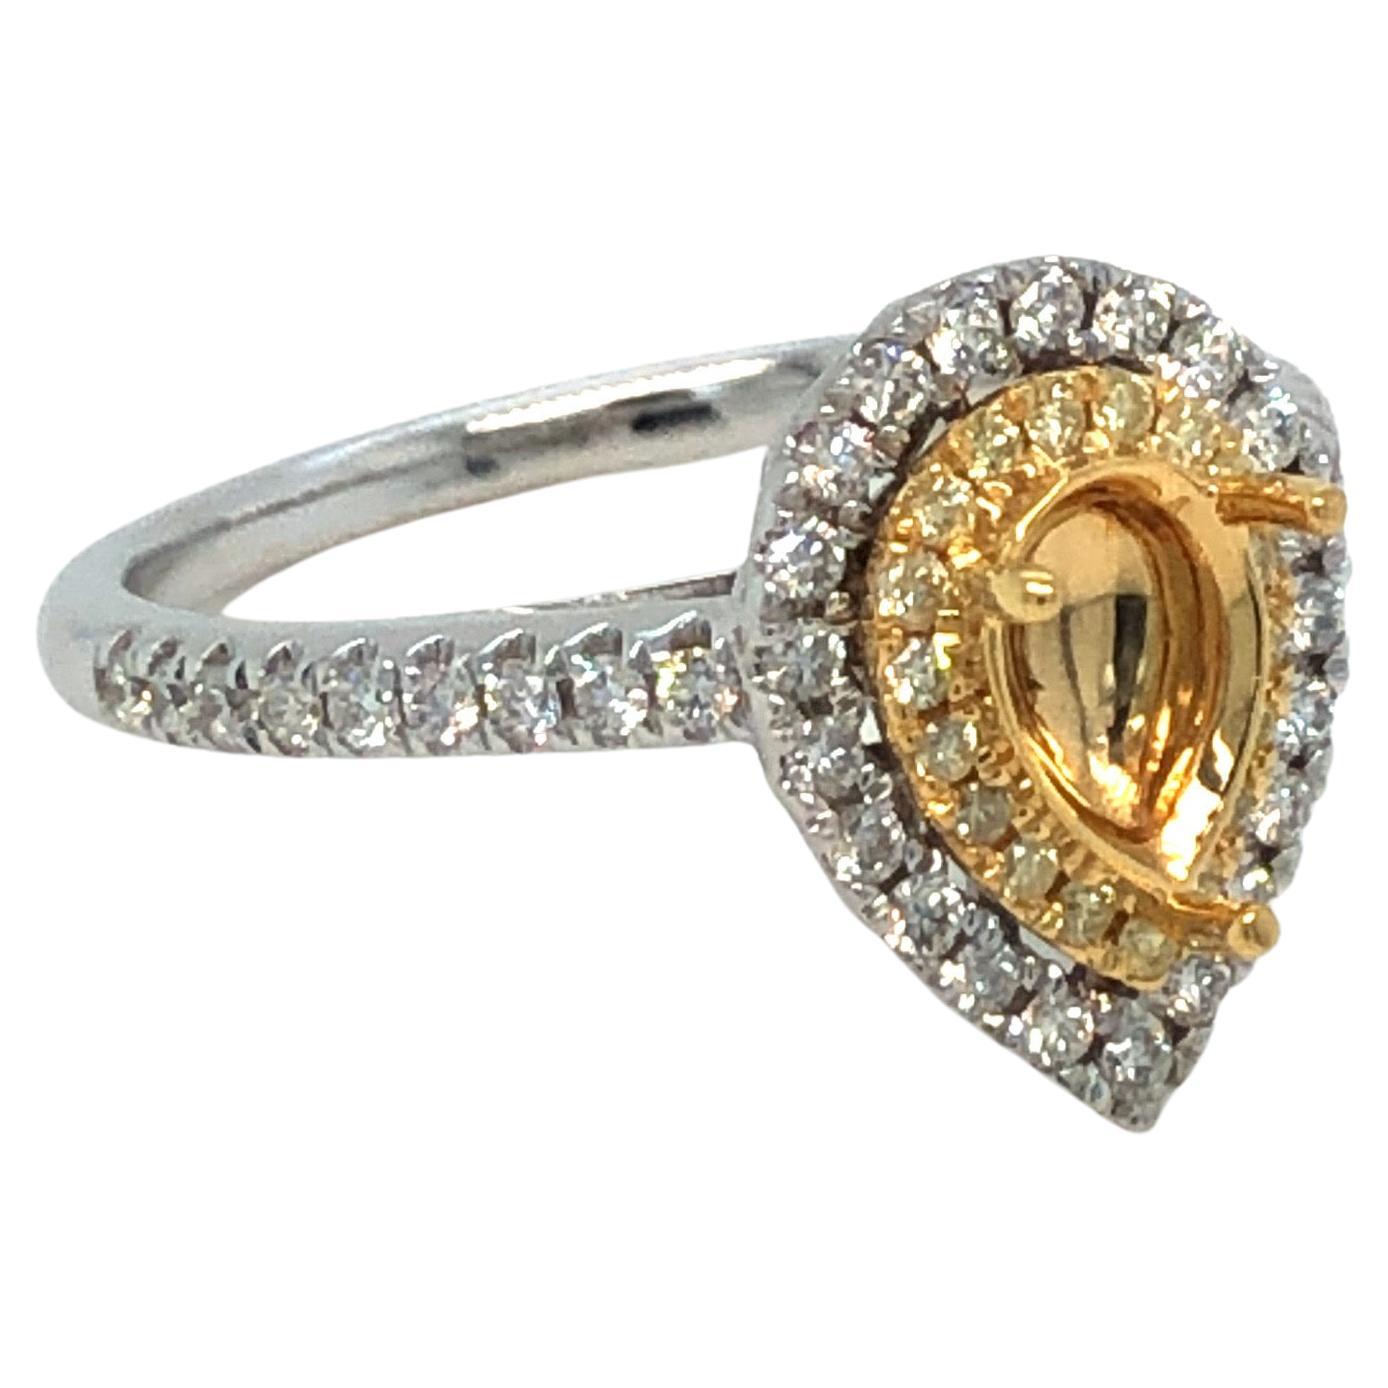 An extremely impressive bespoke ring mount only Ideal for a 0.70 - 0.90 ( 7x5 mm) Carat Natural Fancy Yellow or other coloured gemstone or diamond. For a Pear Shaped Diamond which is set in the centre of the Ring with Double Halo, the inner halo